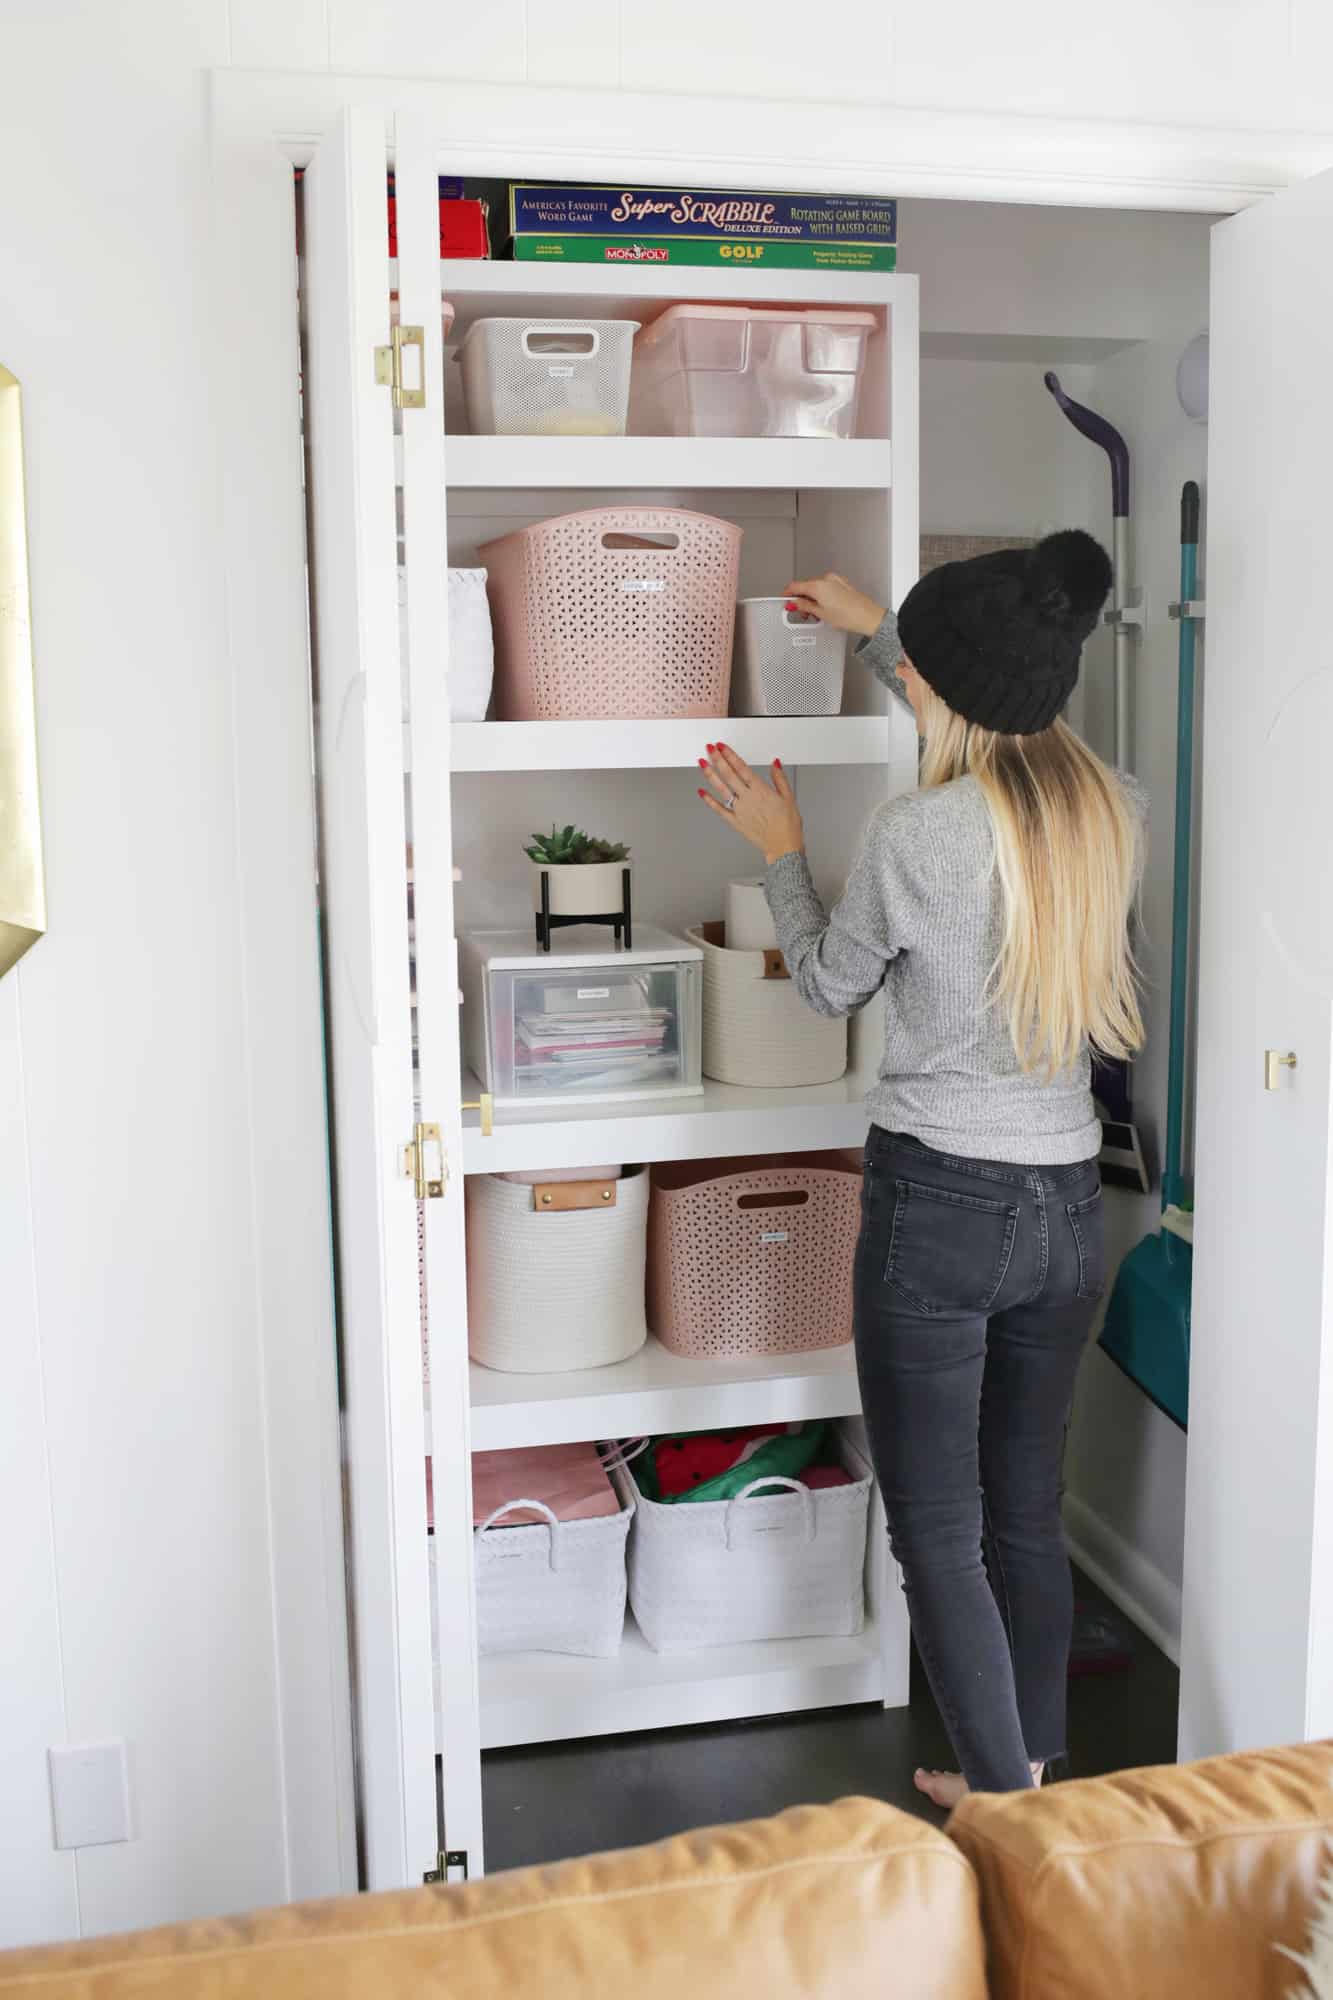 https://abeautifulmess.com/wp-content/uploads/2019/02/How-I-Organized-My-Hall-Closet-in-One-Afternoon-Click-through-for-tips-1-2.jpg